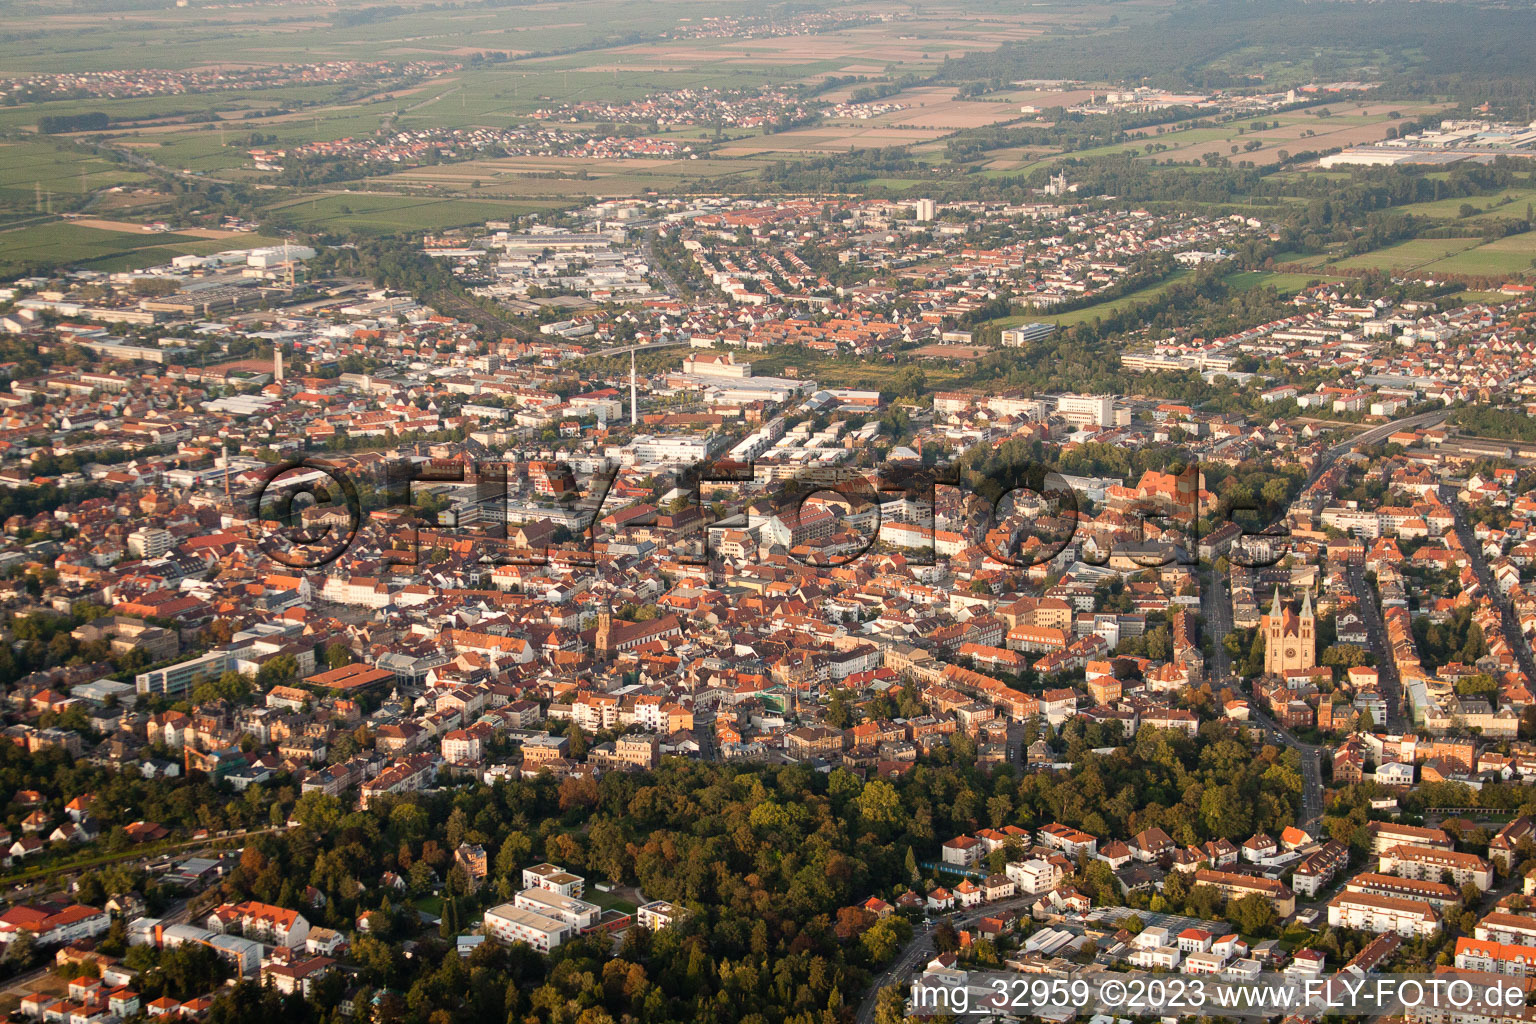 Landau in der Pfalz in the state Rhineland-Palatinate, Germany from above